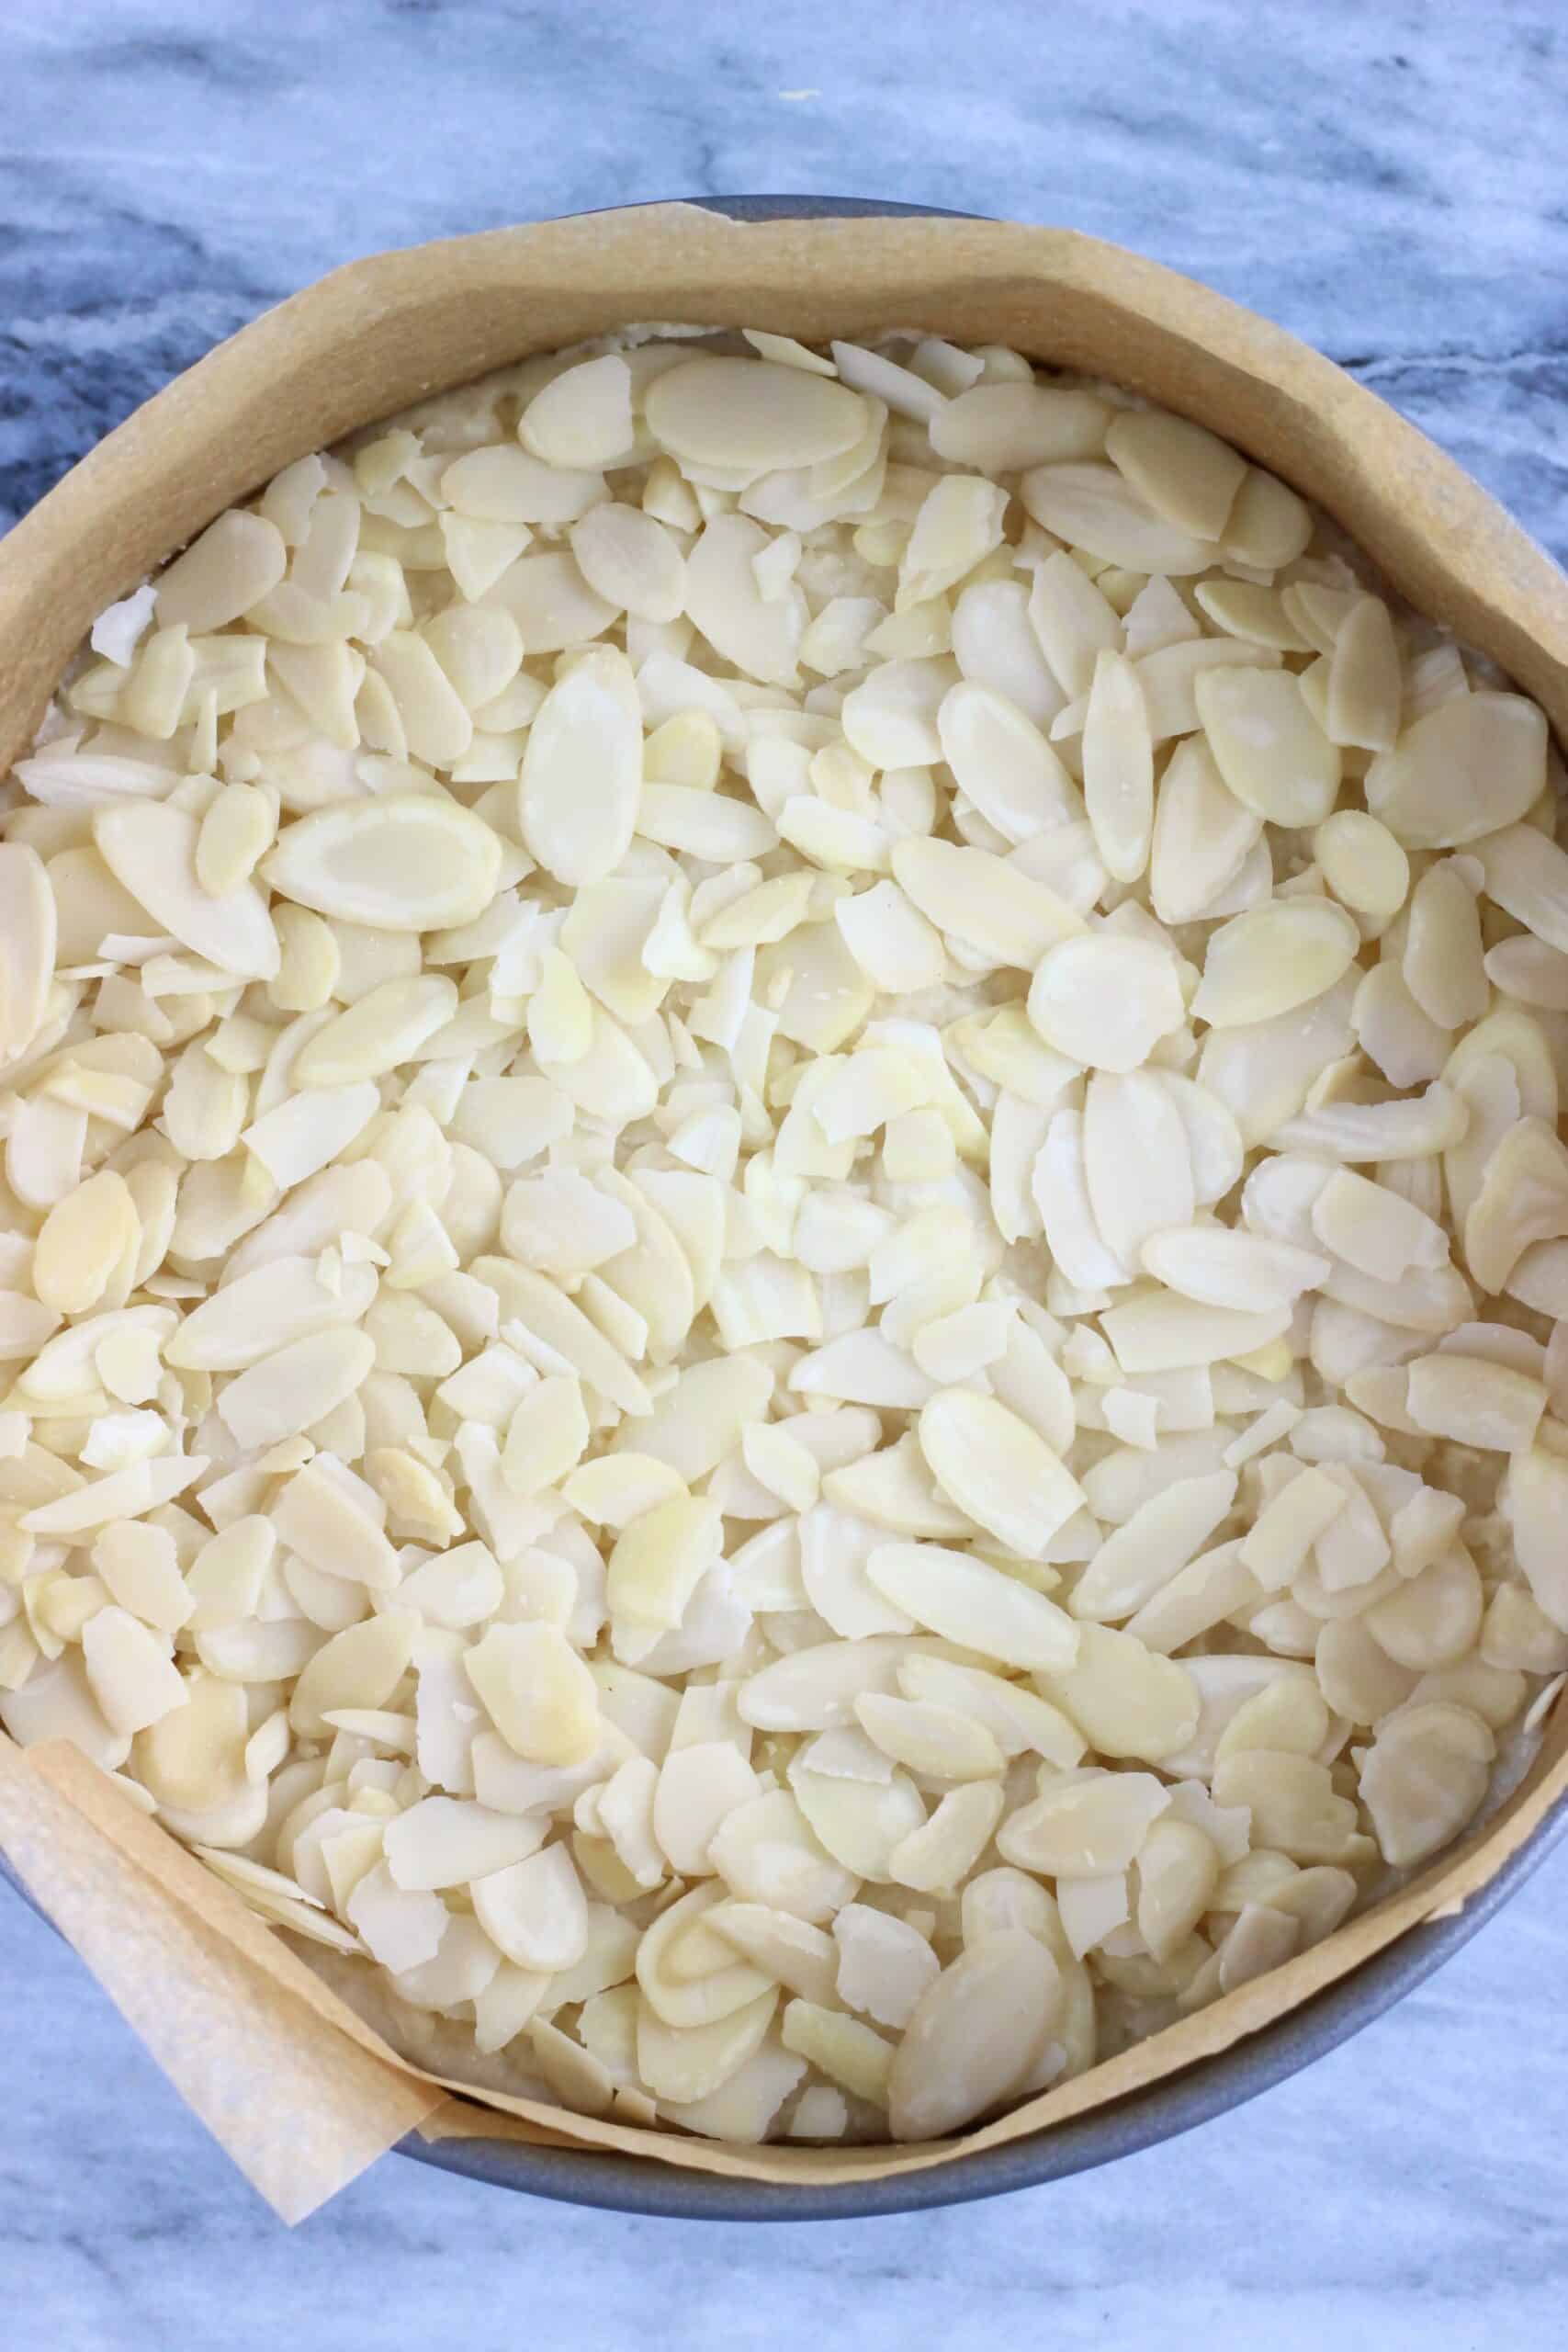 Raw gluten-free vegan almond cake batter topped with flaked almonds in a springform baking tin lined with baking paper